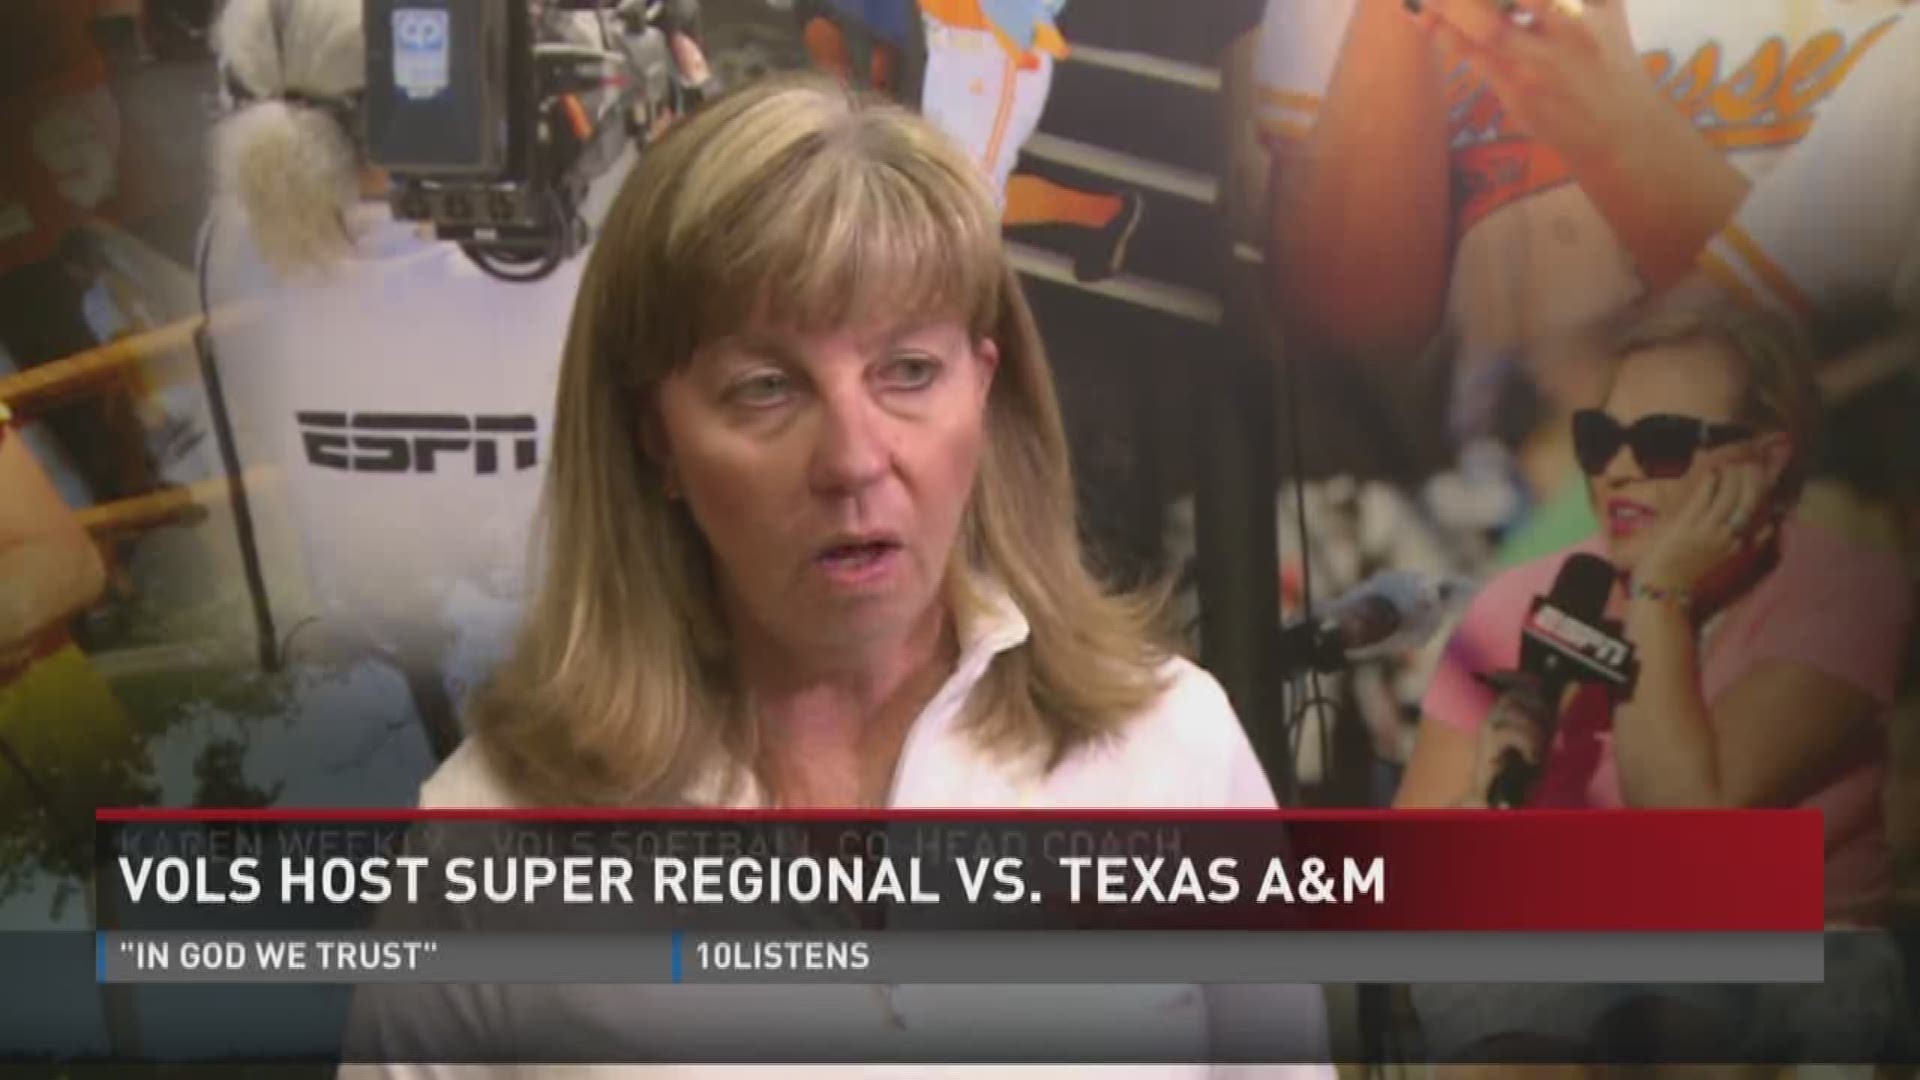 Tennessee softball hosts Texas A&M this weekend with a trip to the College World Series on the line. The Vols took two-of-three from the Aggies in their regular season meeting in College Station.